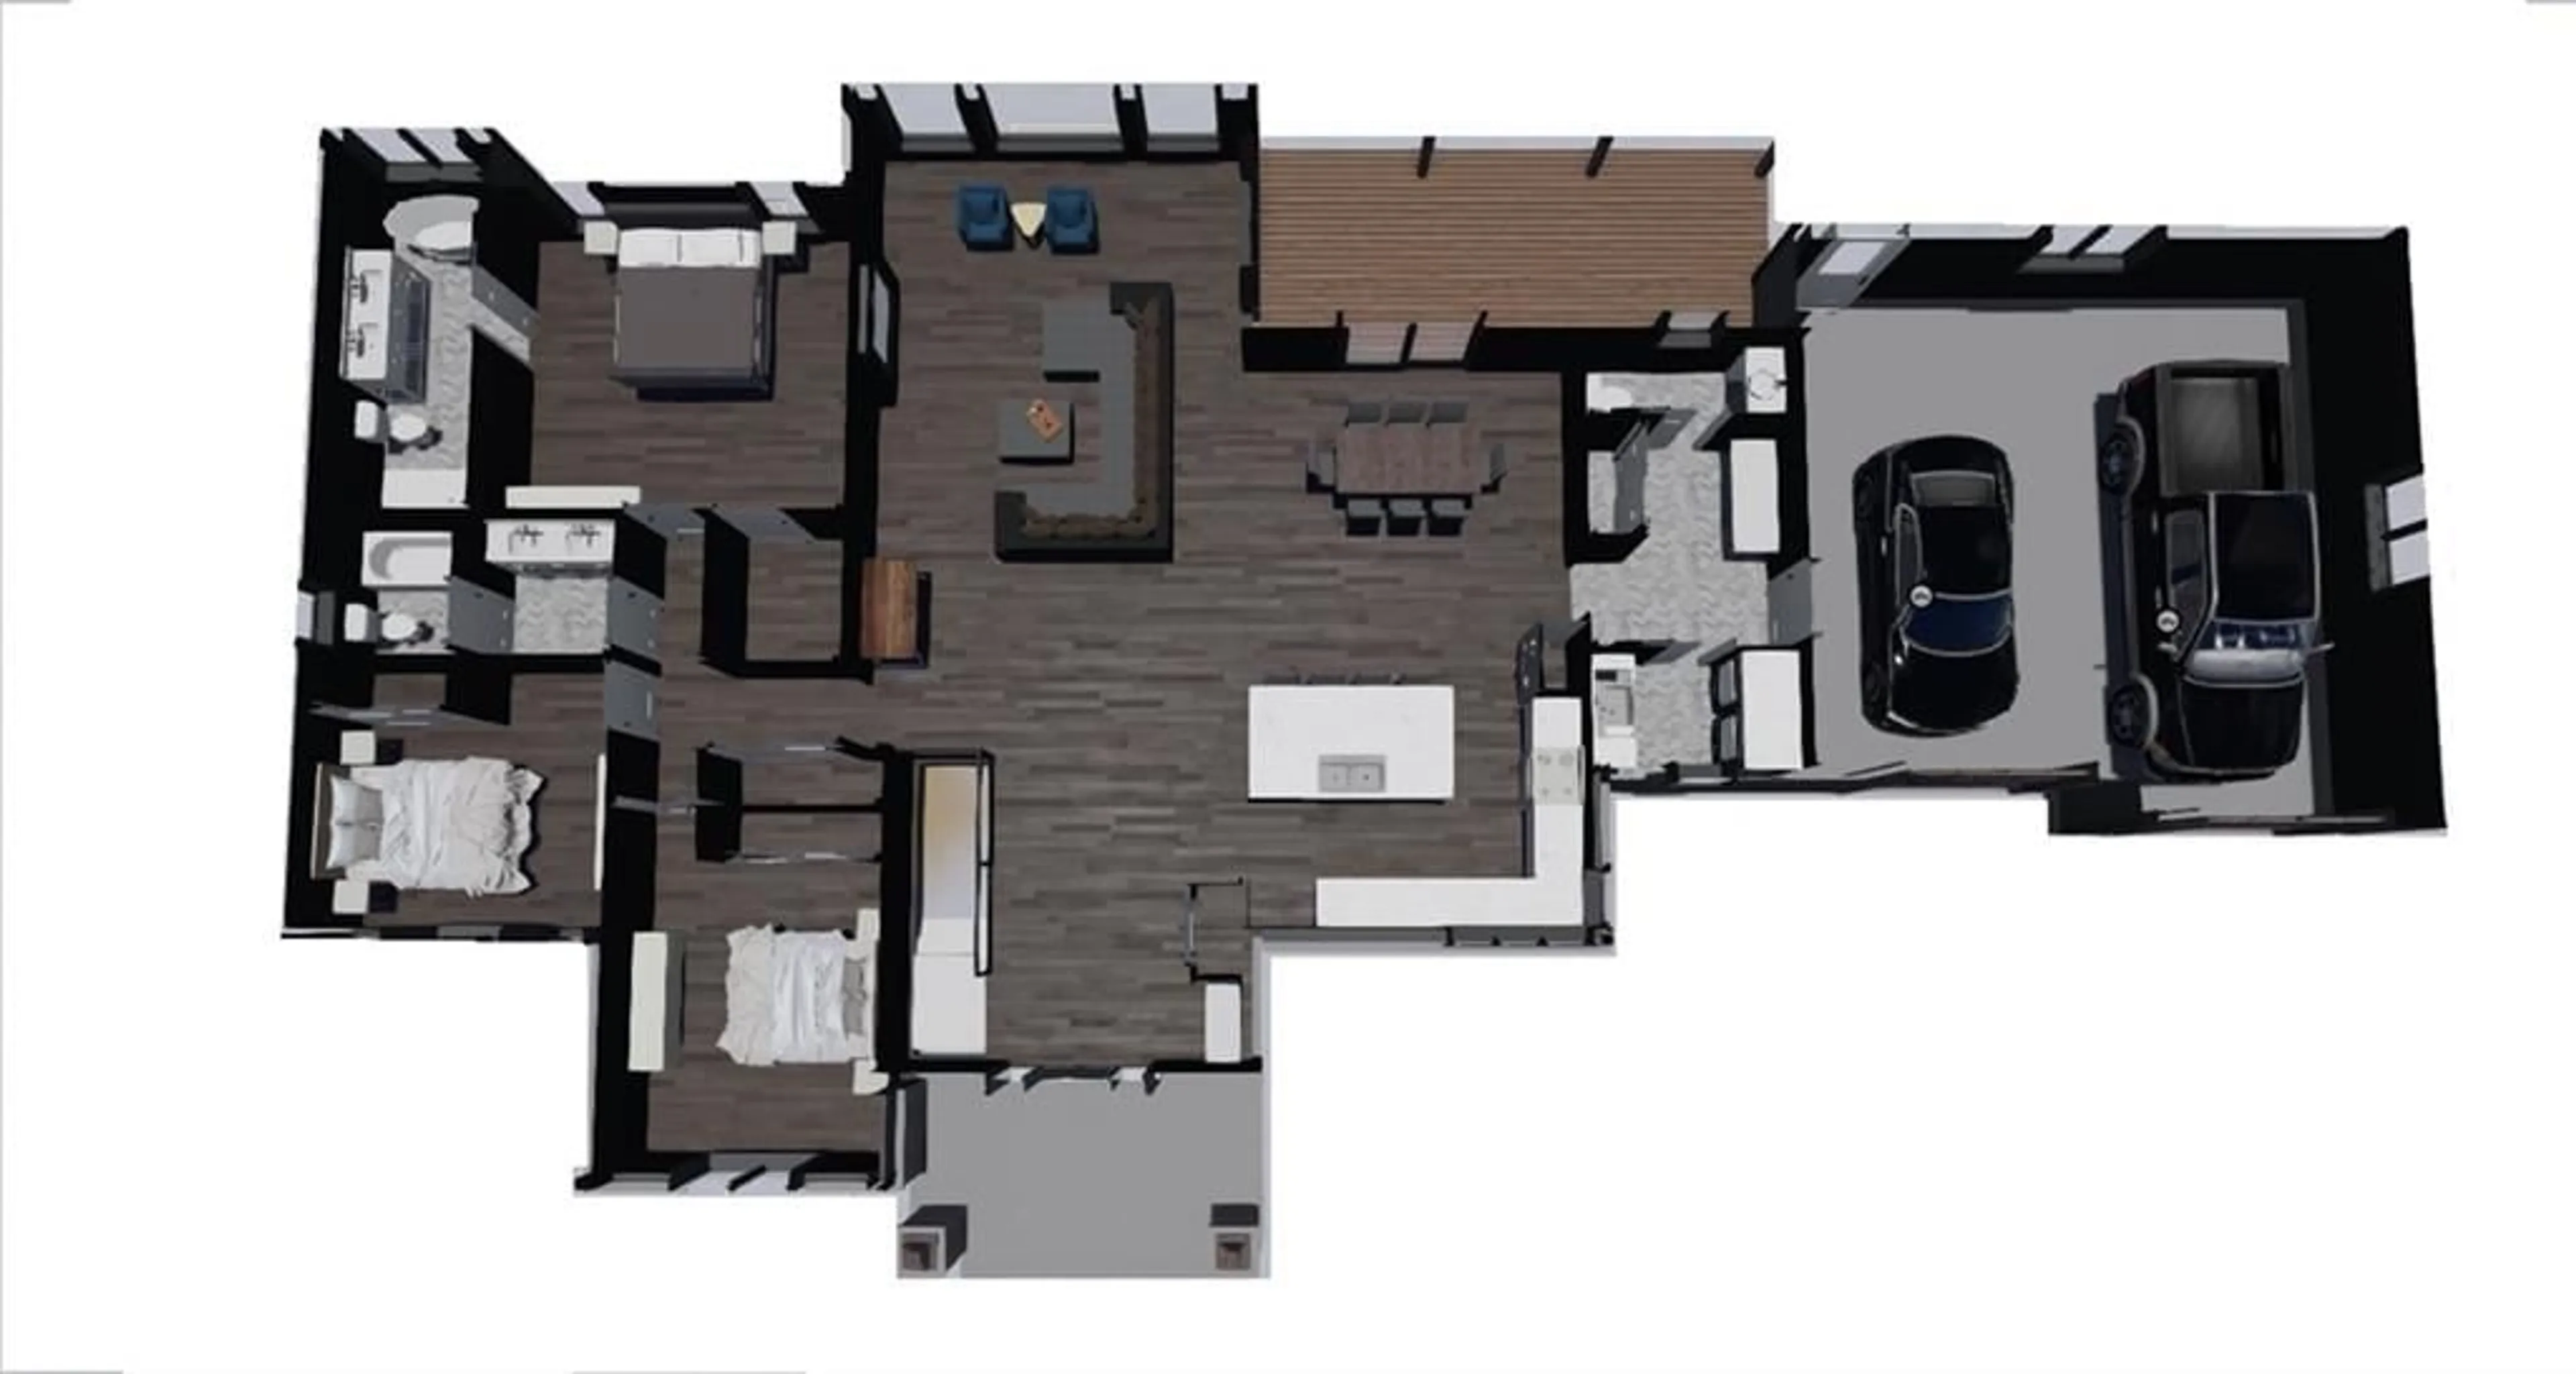 Floor plan for 1058 South Muldrew Lake Road Rd, Kilworthy Ontario P0E 1G0